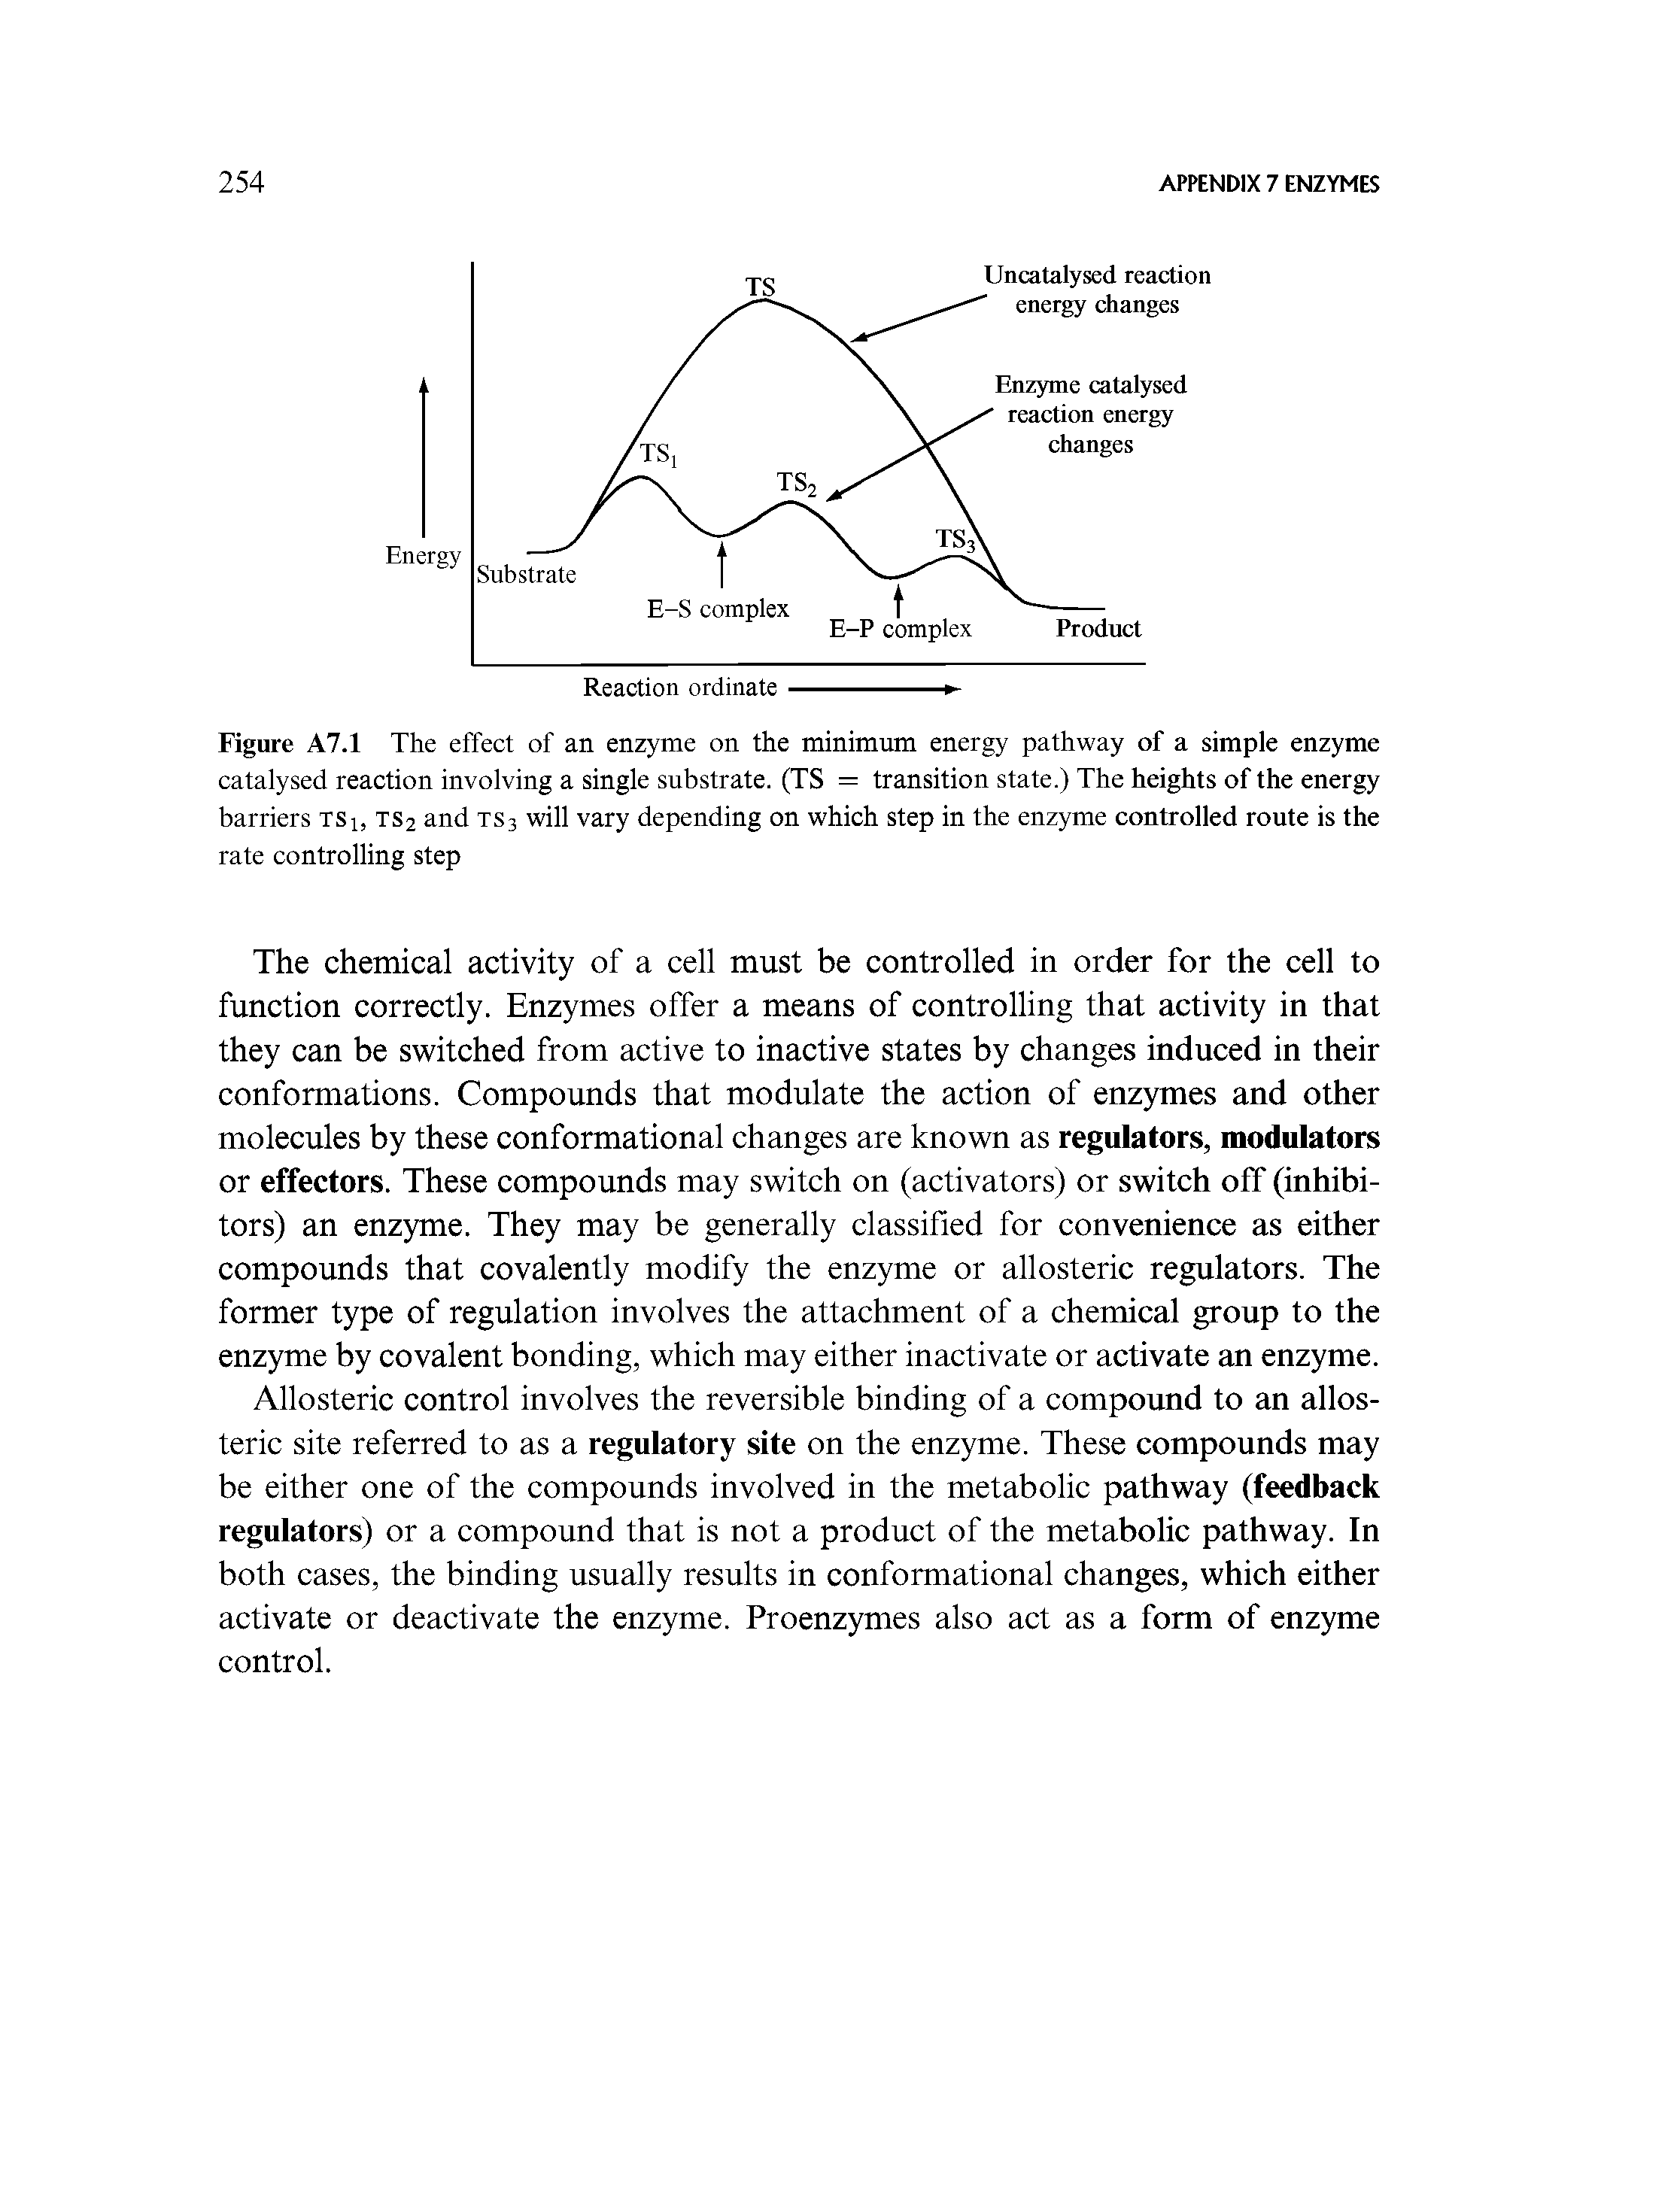 Figure A7.1 The effect of an enzyme on the minimum energy pathway of a simple enzyme catalysed reaction involving a single substrate. (TS = transition state.) The heights of the energy barriers TSi, ts2 and ts3 will vary depending on which step in the enzyme controlled route is the rate controlling step...